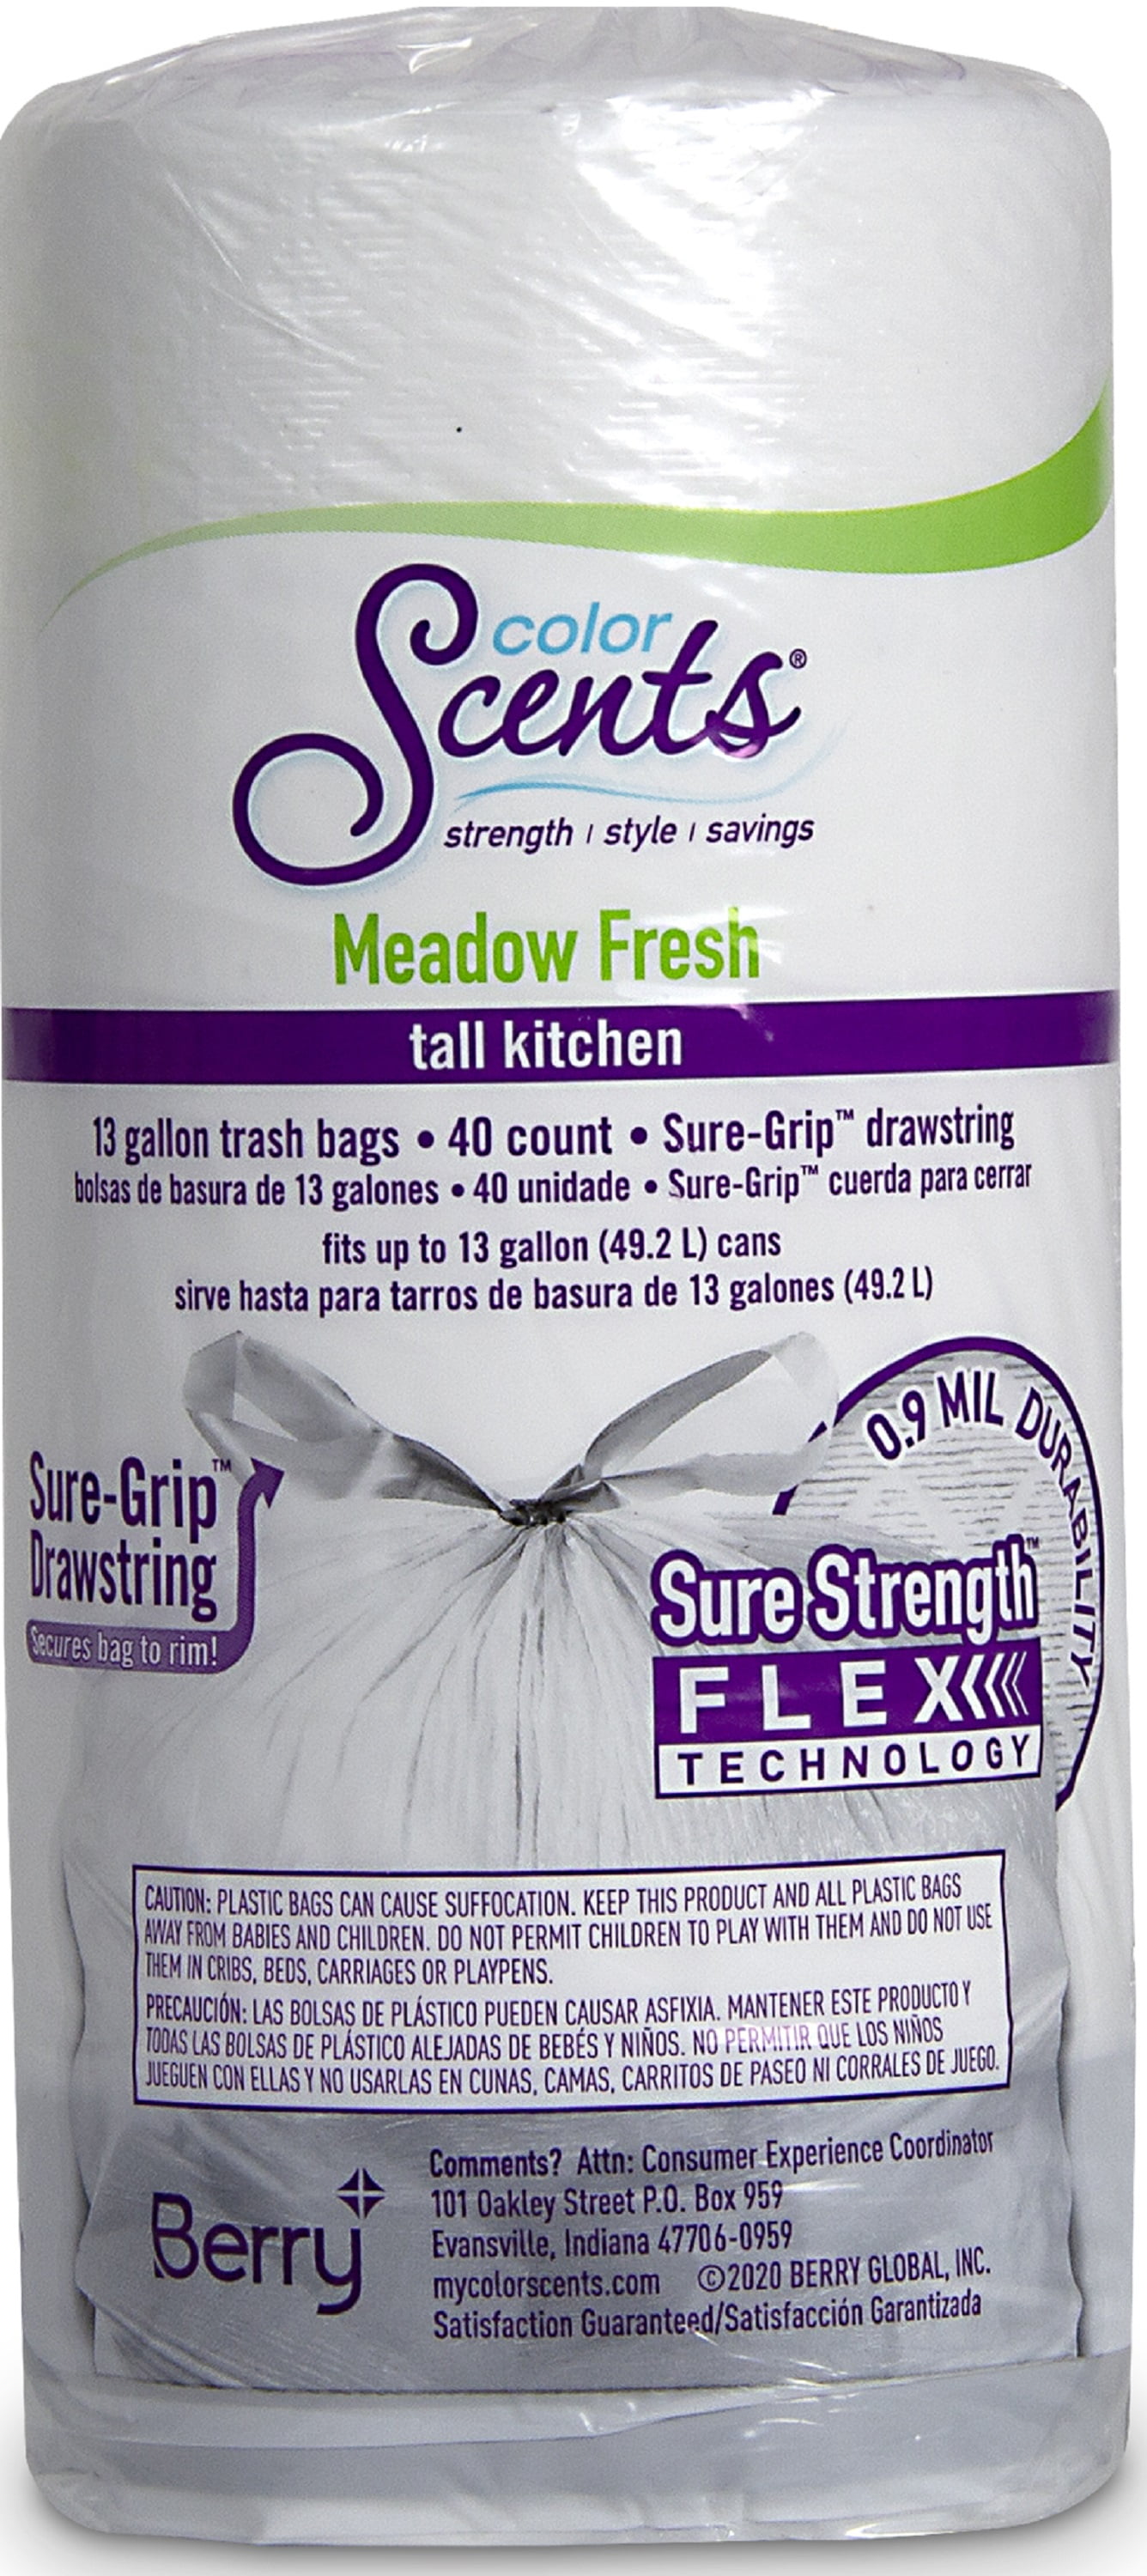 Color Scent Strong Flex Tall Kitchen Trash Bags, 13 Gallon, 40 Bags (Meadow Fresh Scent, Odor Control, Stretch Drawstring)